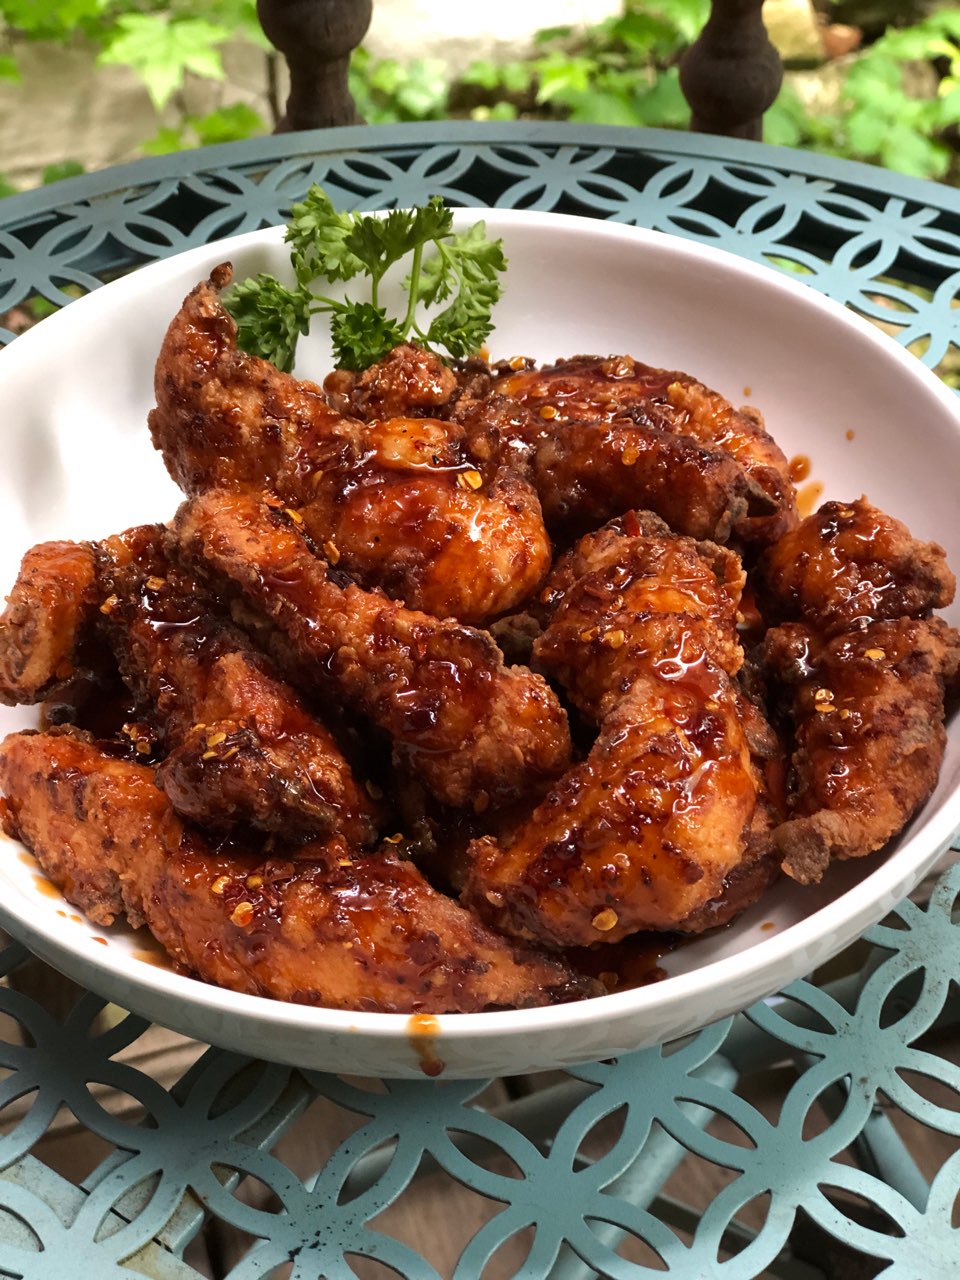 Spicy Korean Fried Chicken with Gochujang Sauce